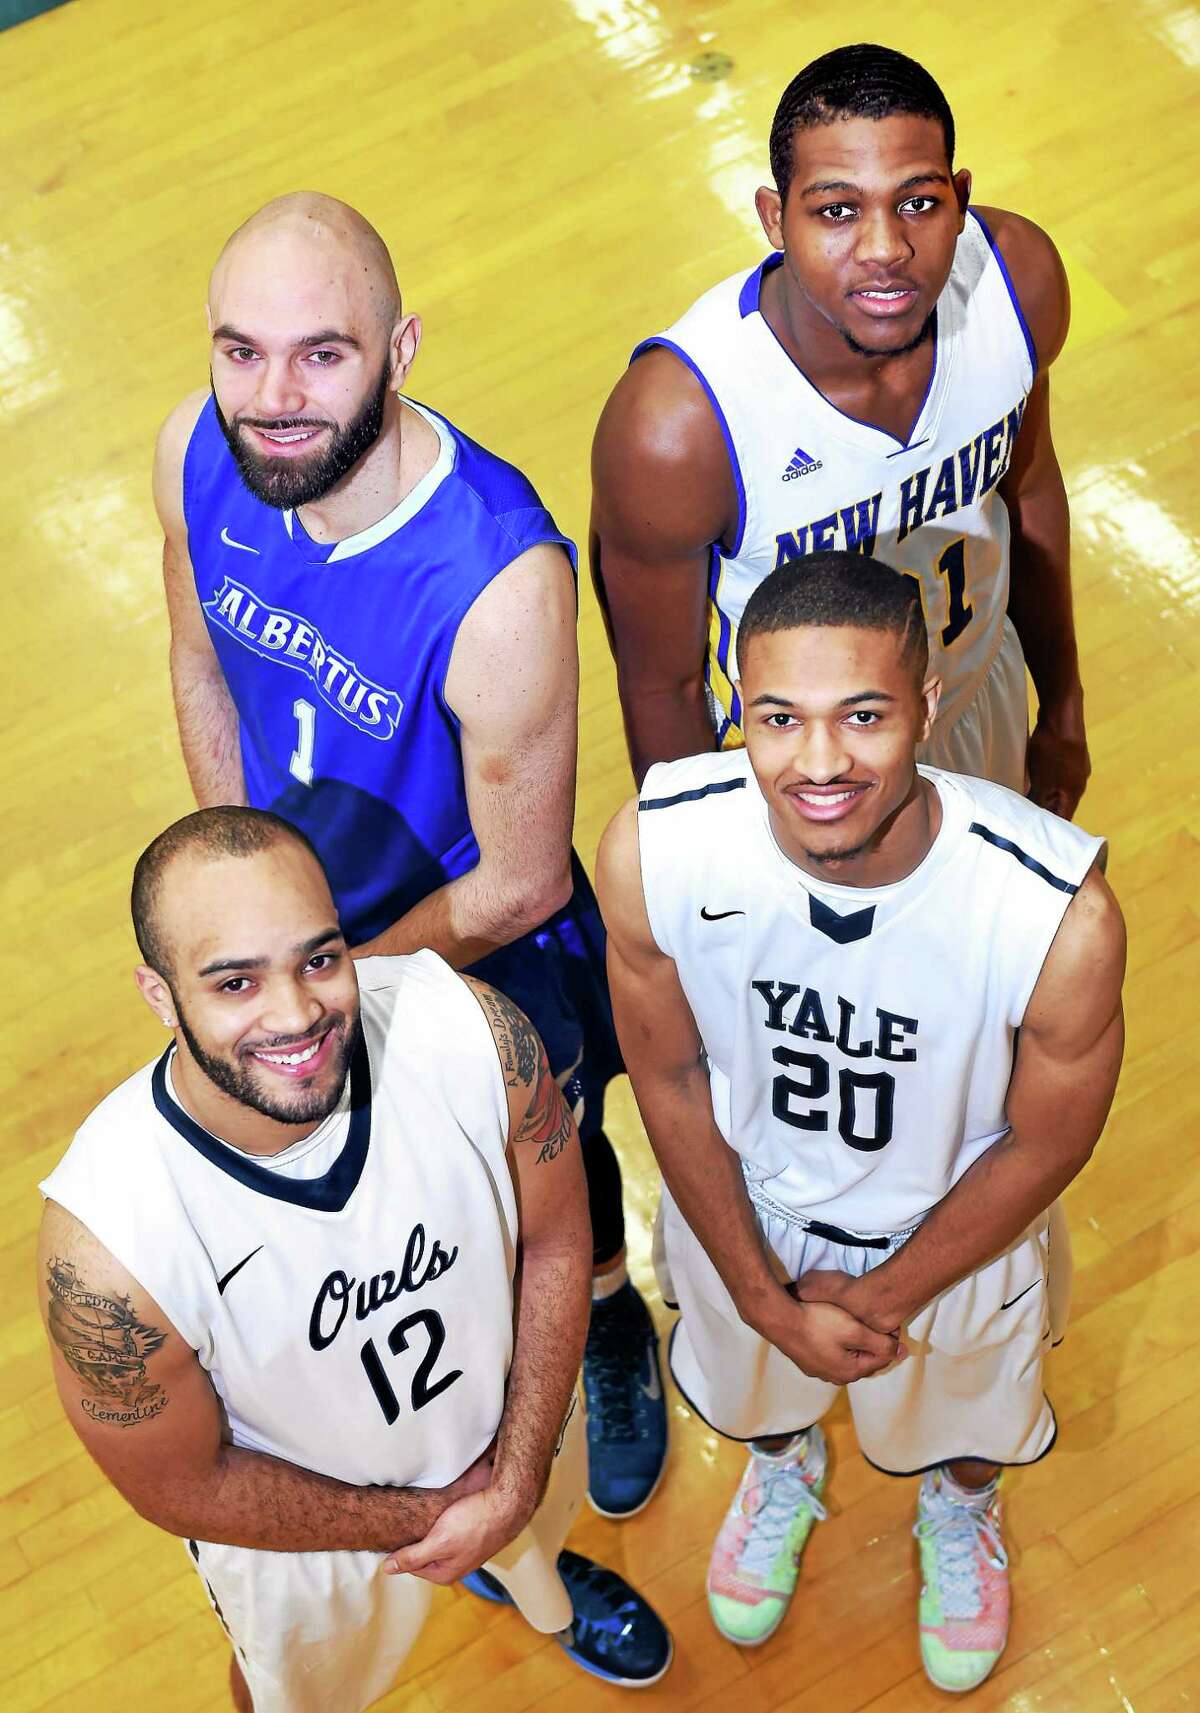 Clockwise from bottom left, Tylon Smith of SCSU, Victor Ljuljdjuraj of Albertus Magnus, Eric Anderson of UNH and Javier Duren of Yale.